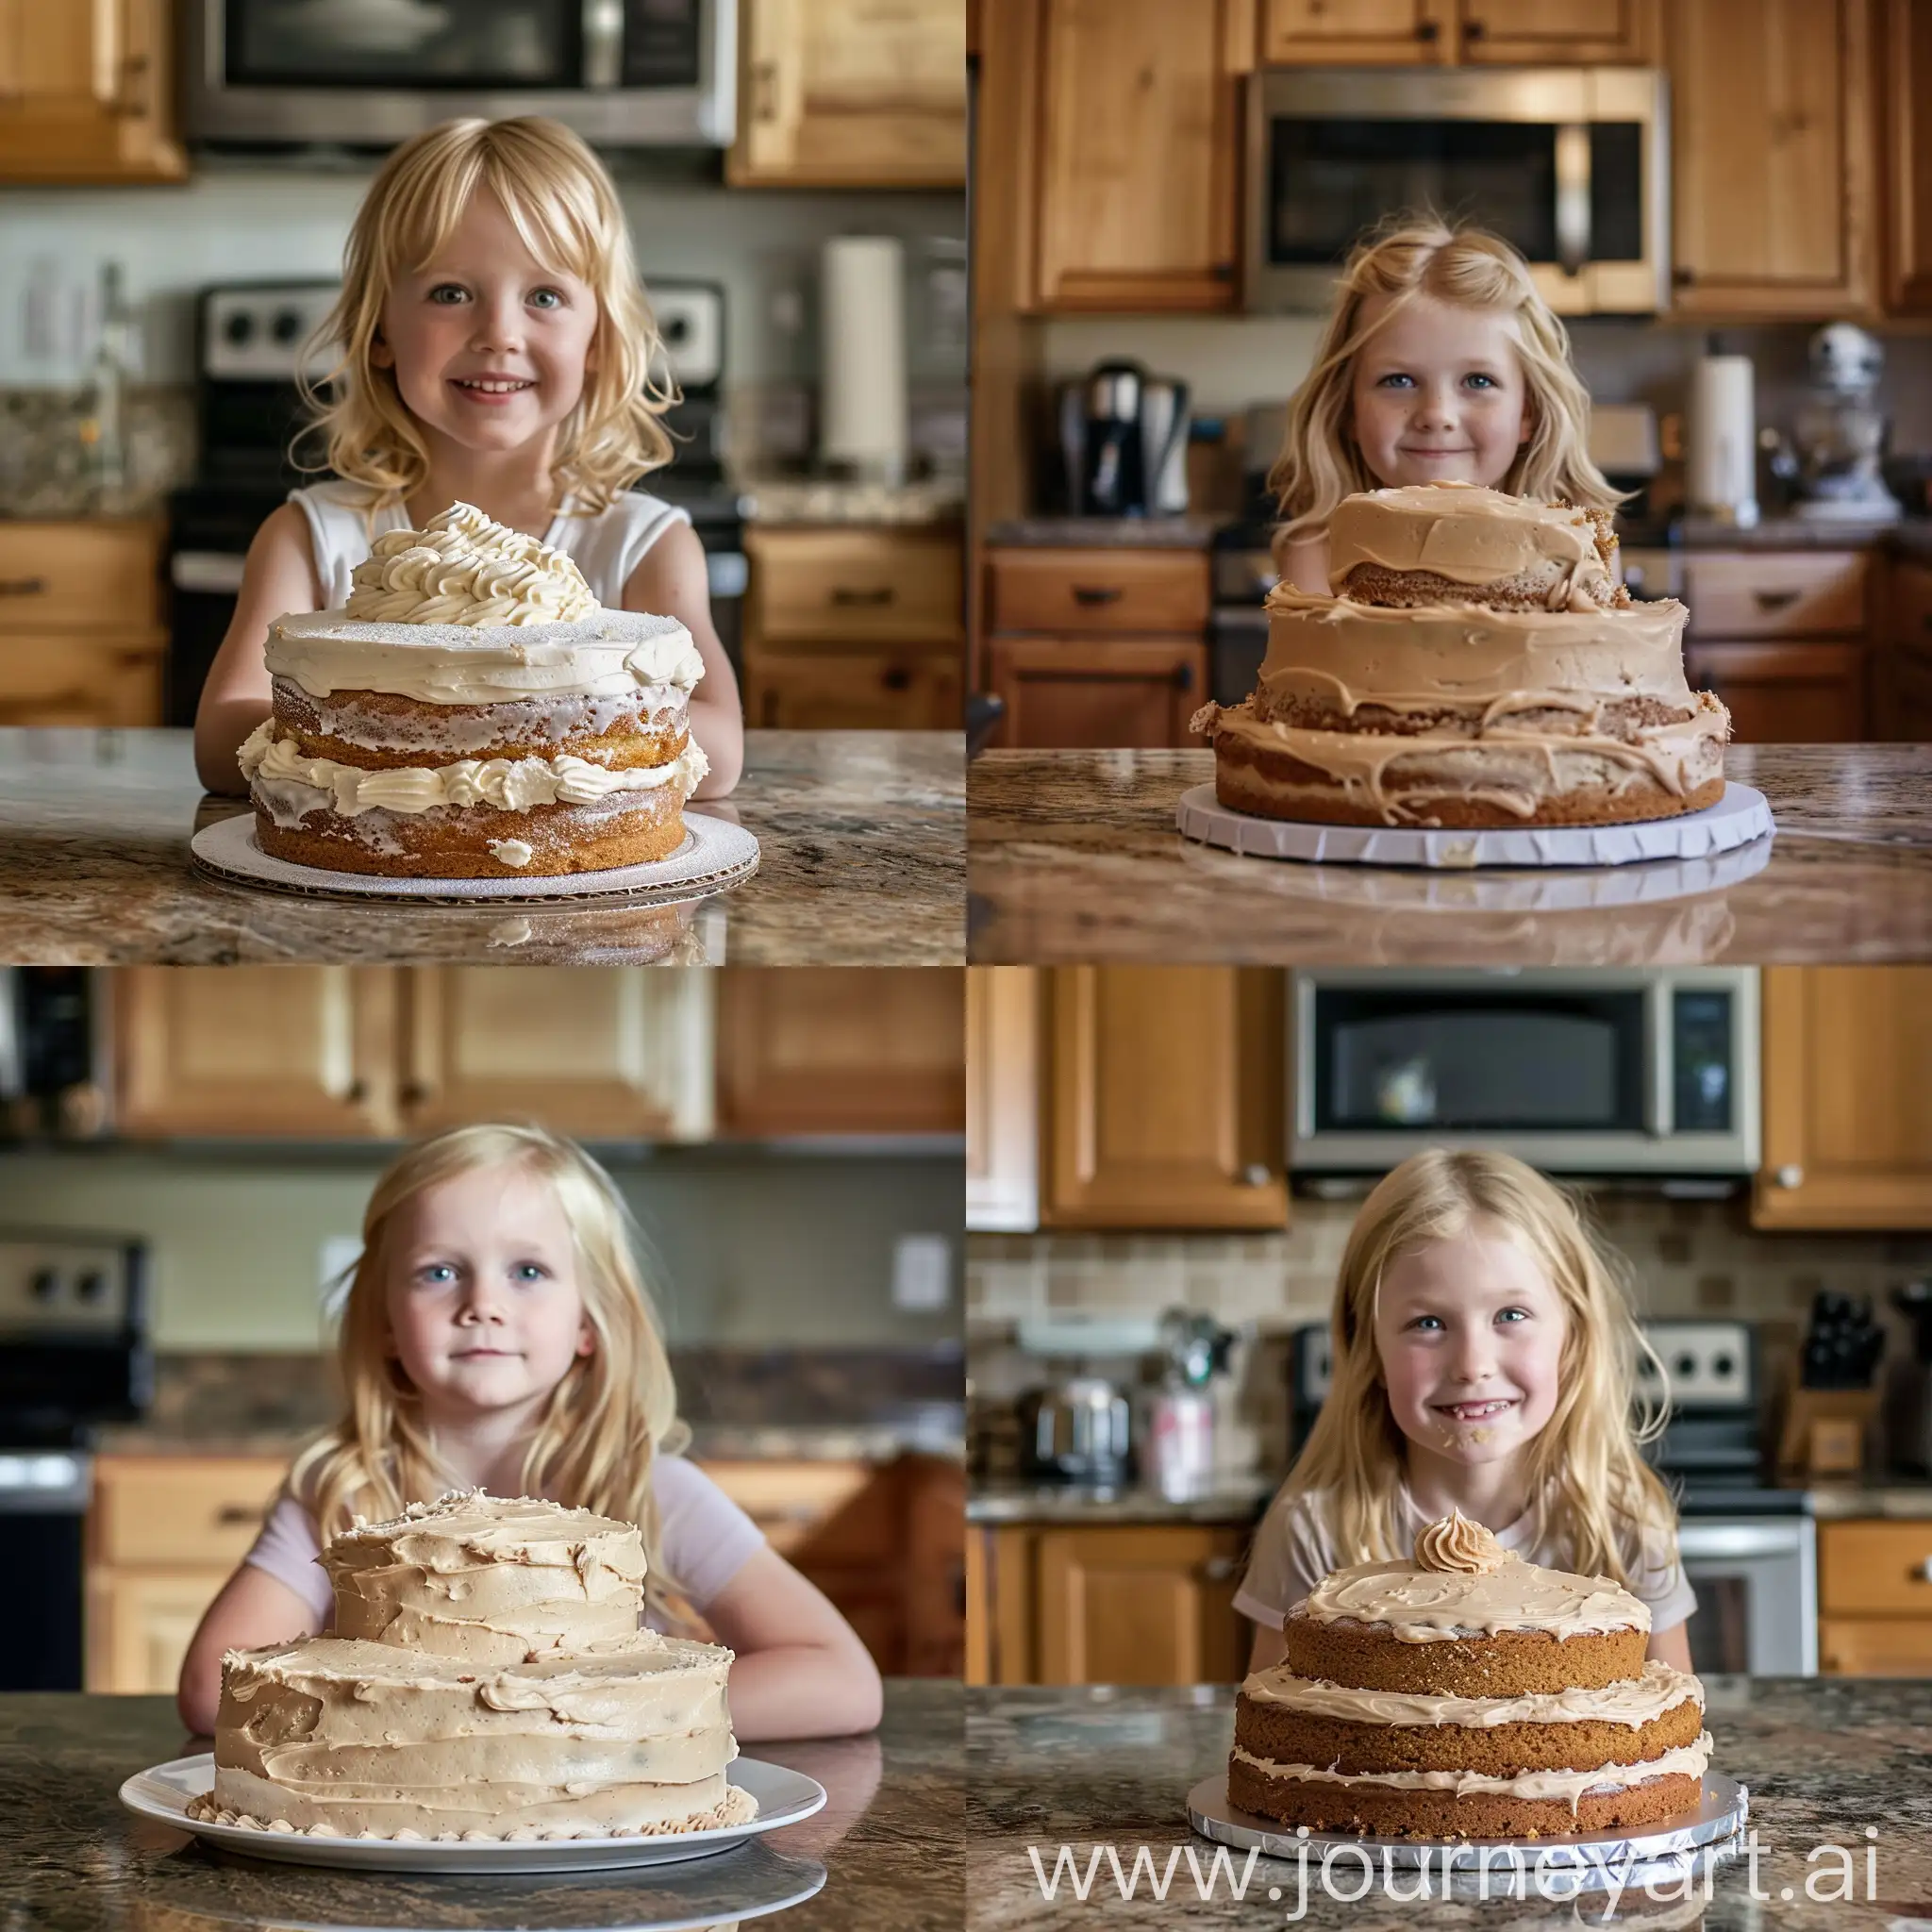 Blonde-Girl-with-Frosted-Cake-Sweet-Baking-Moment-in-Kitchen